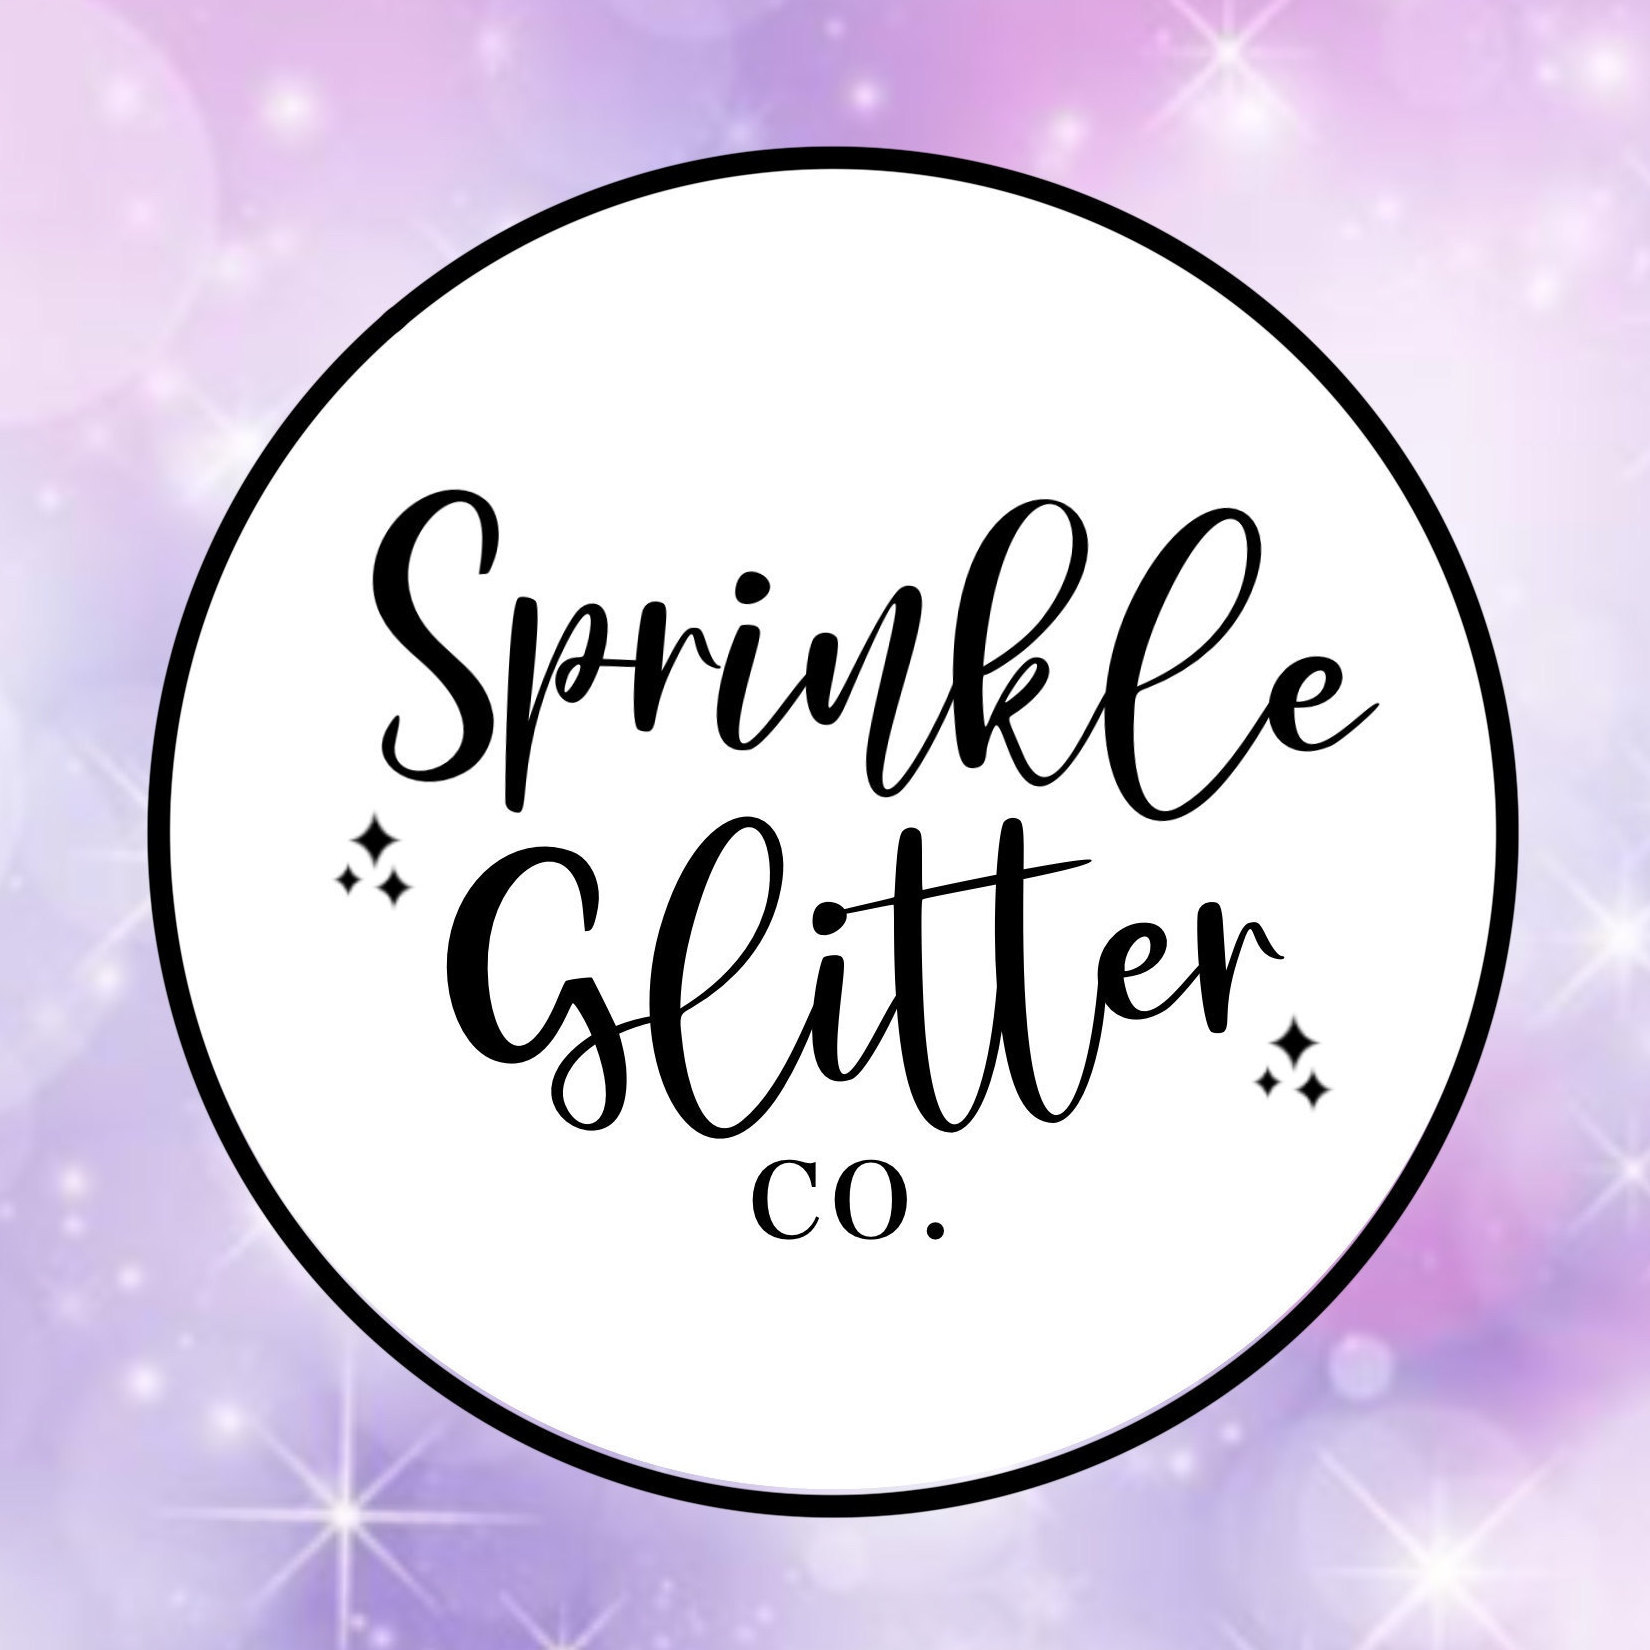 Sprinkle some glitter into your life by SprinkleGlitterCo on Etsy